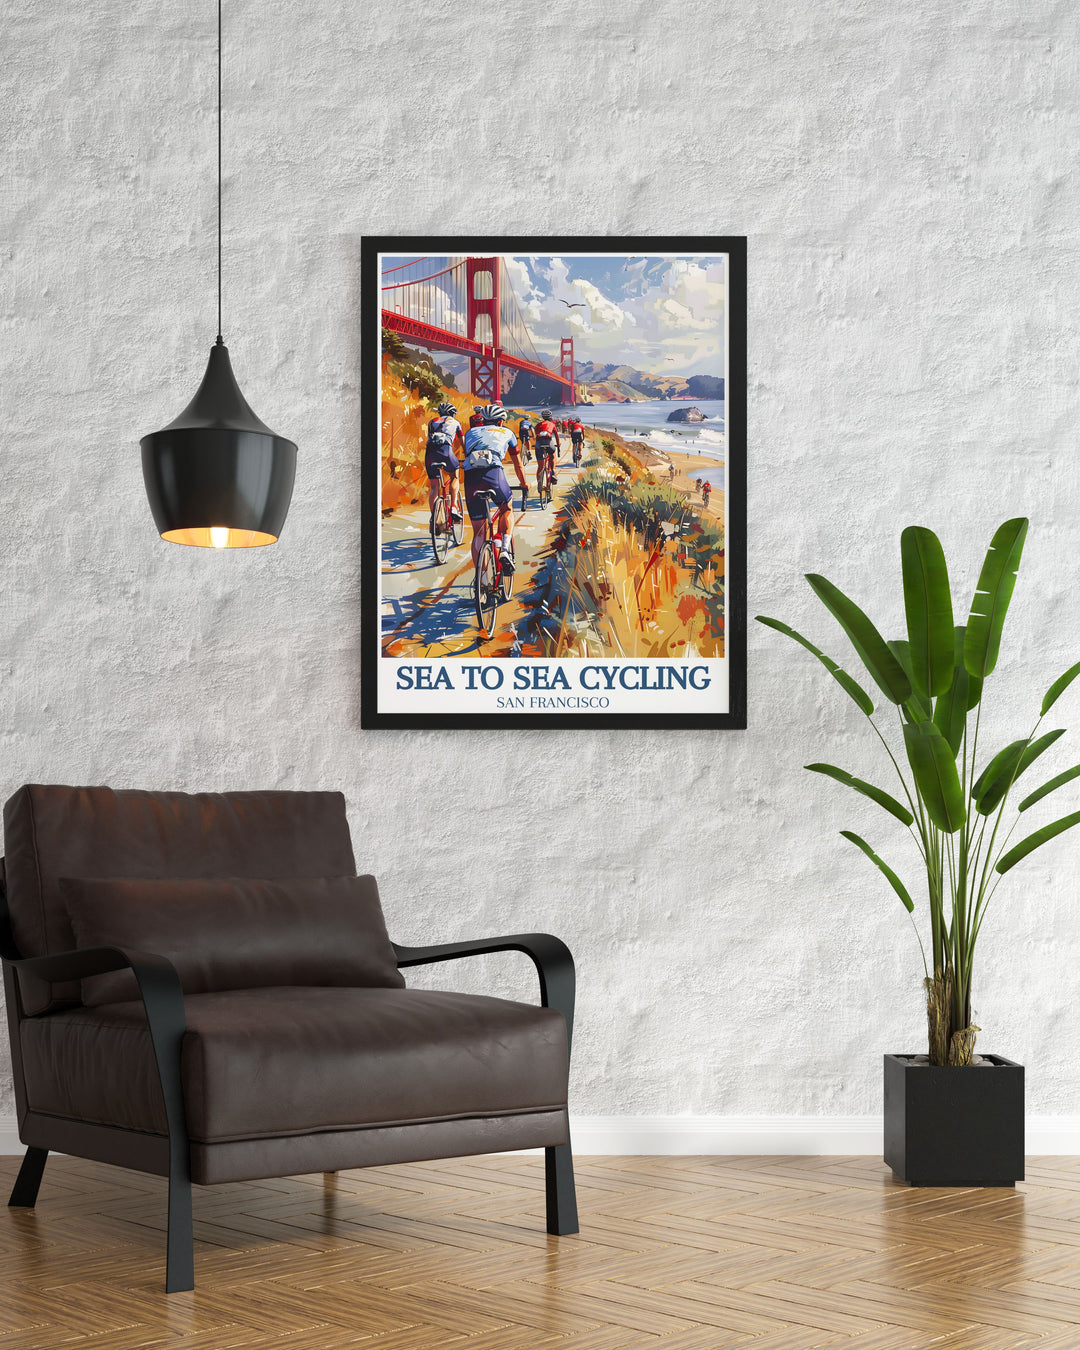 The Sea to Sea Cycling Route and the Golden Gate Bridge are beautifully depicted in this poster, celebrating the iconic landmarks and scenic vistas from coast to coast, ideal for cycle touring enthusiasts.